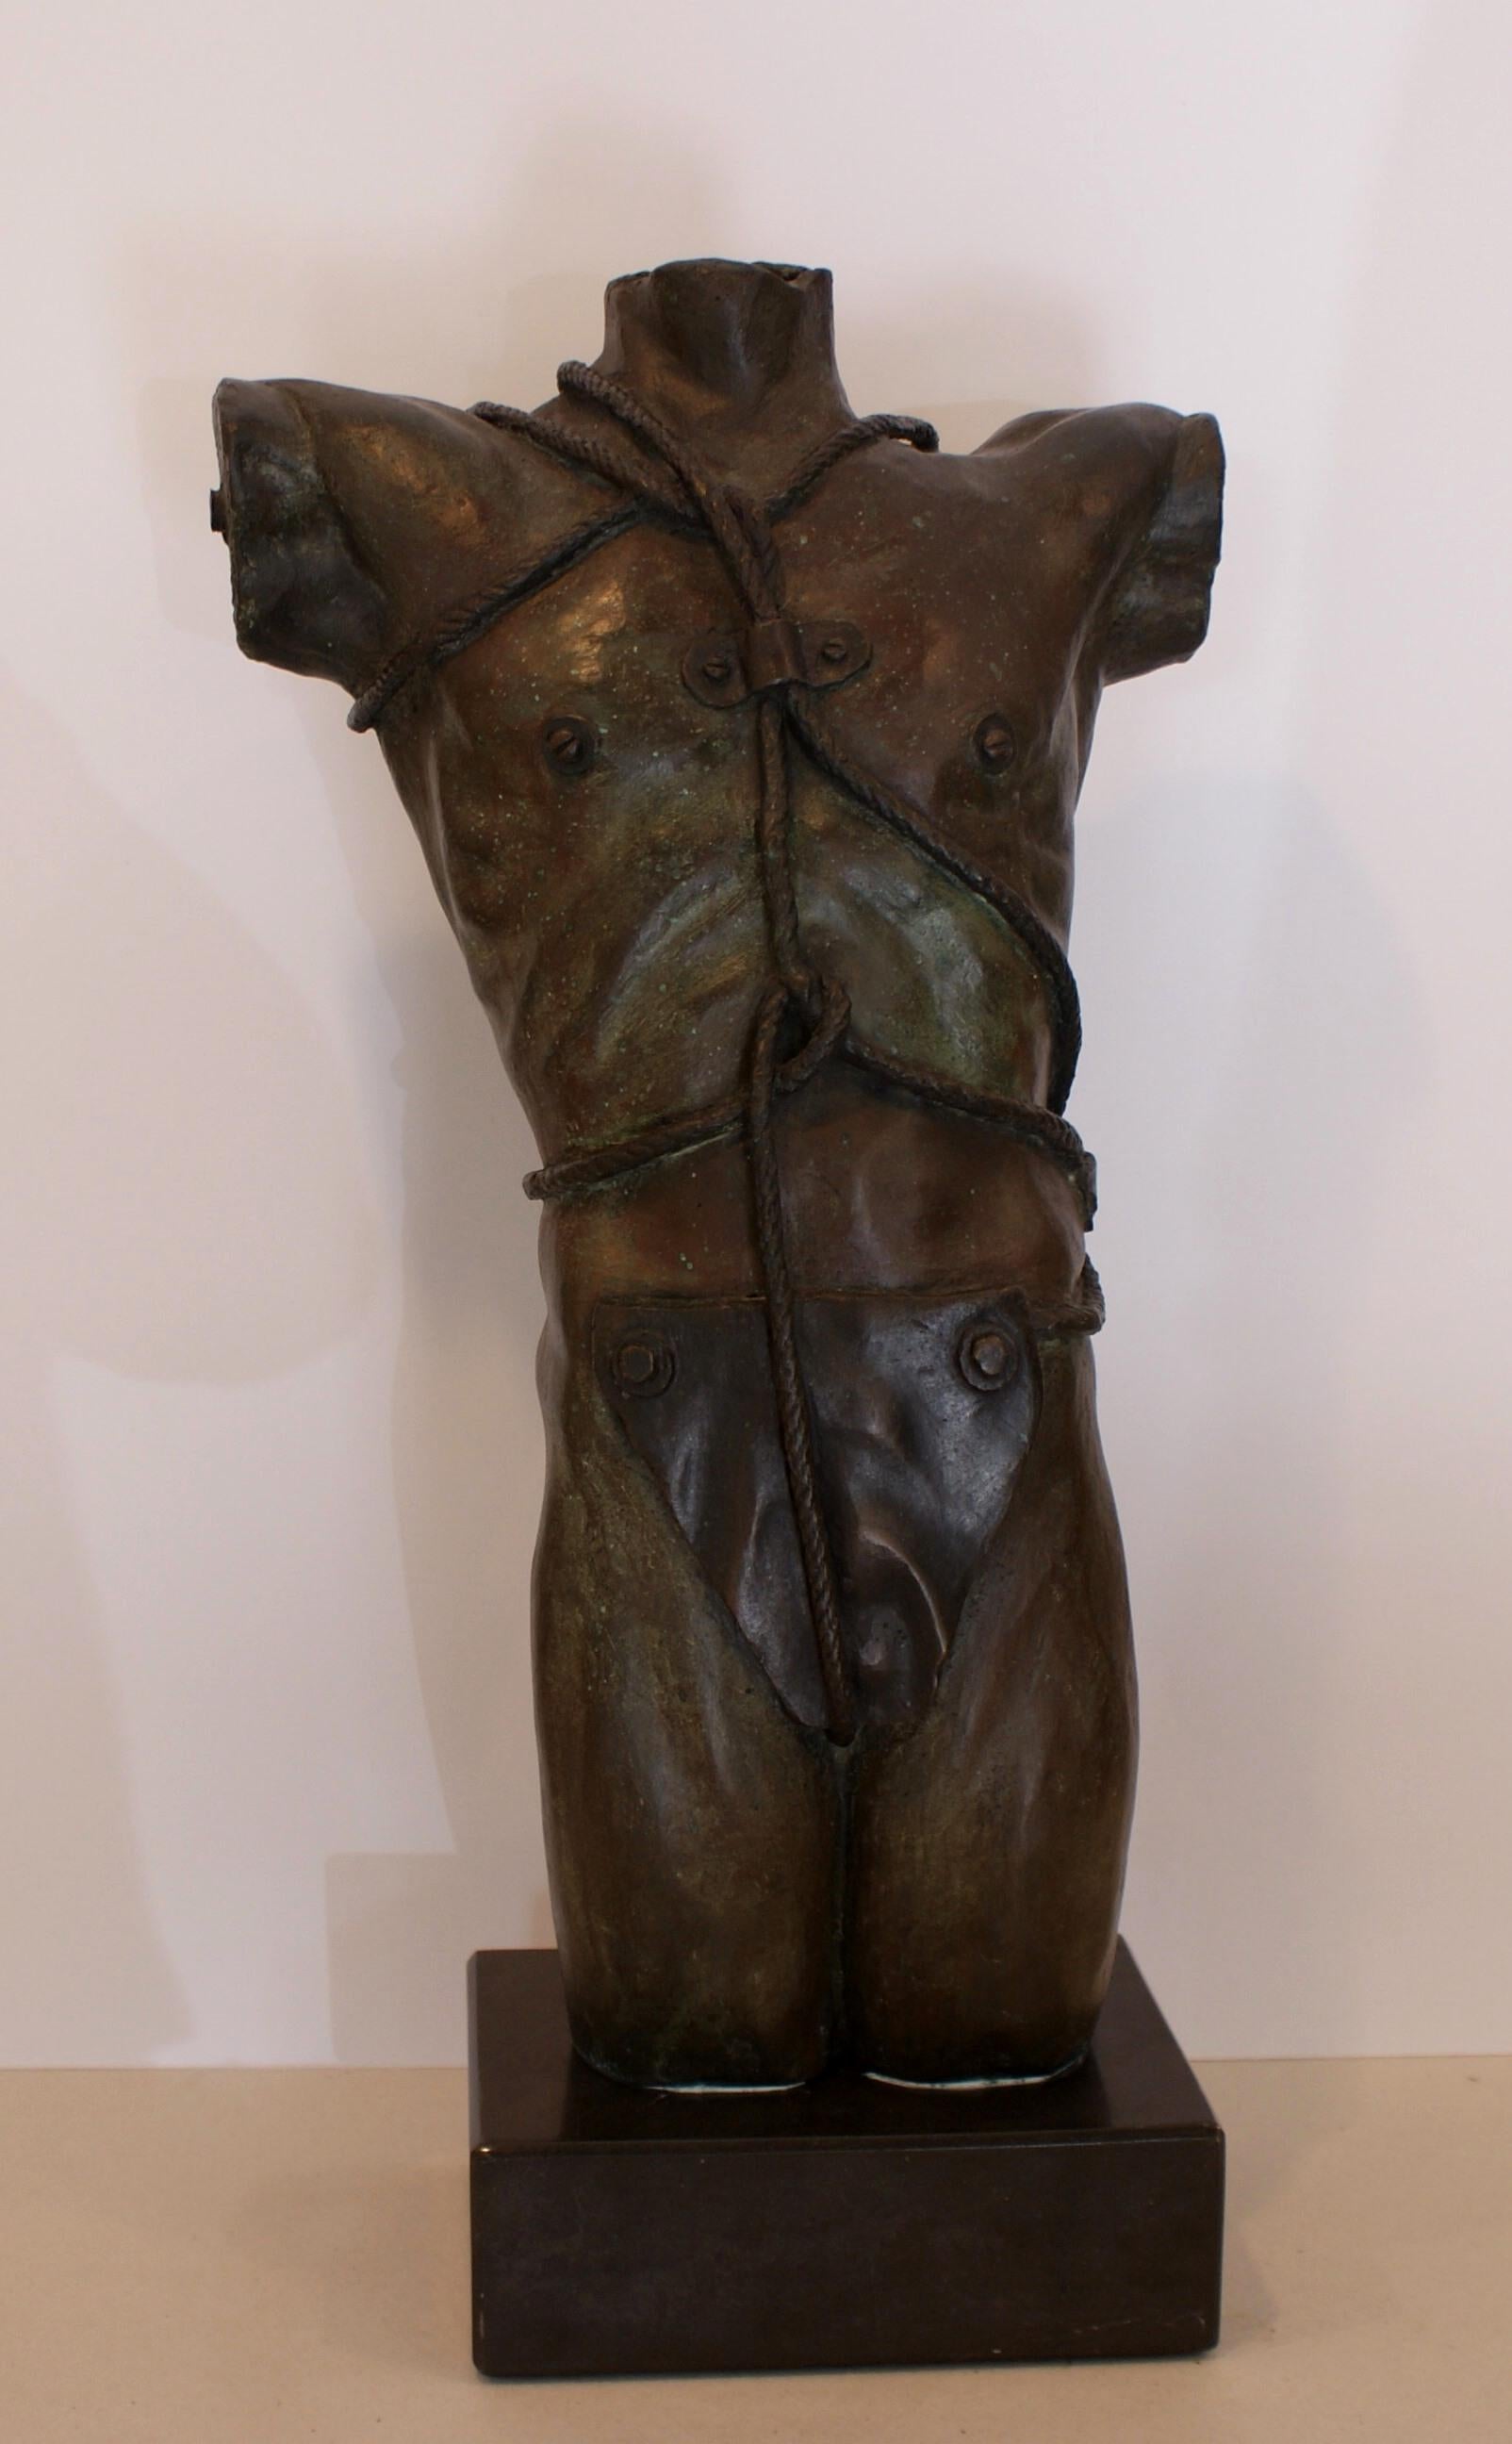 J. Casamayor. Torso of a man with a marble base.. original bronze 7/7 sculpture
José Casamayor began, at the age of eight, in the disciplines of drawing and painting, when he attended classes taught by the Granada-born watercolorist Juan de Dios